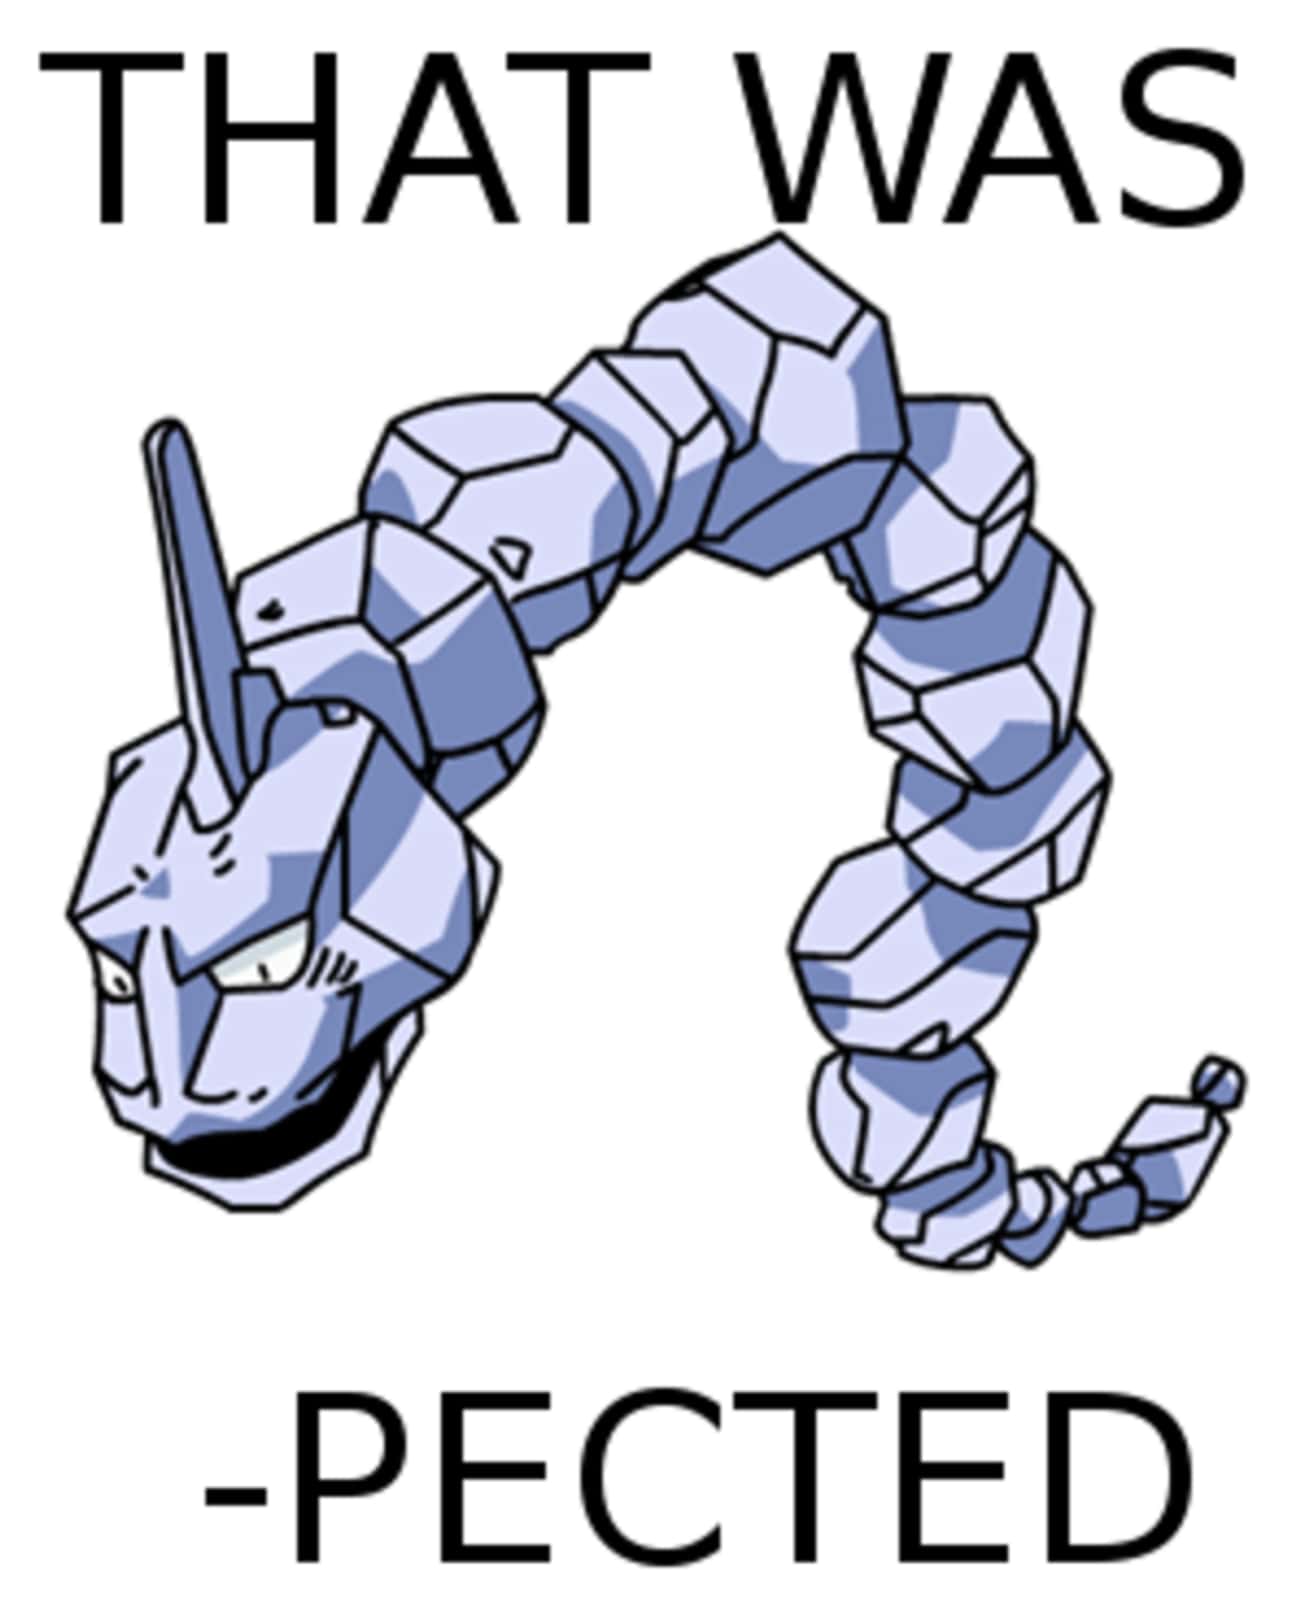 Totally Onix-pected